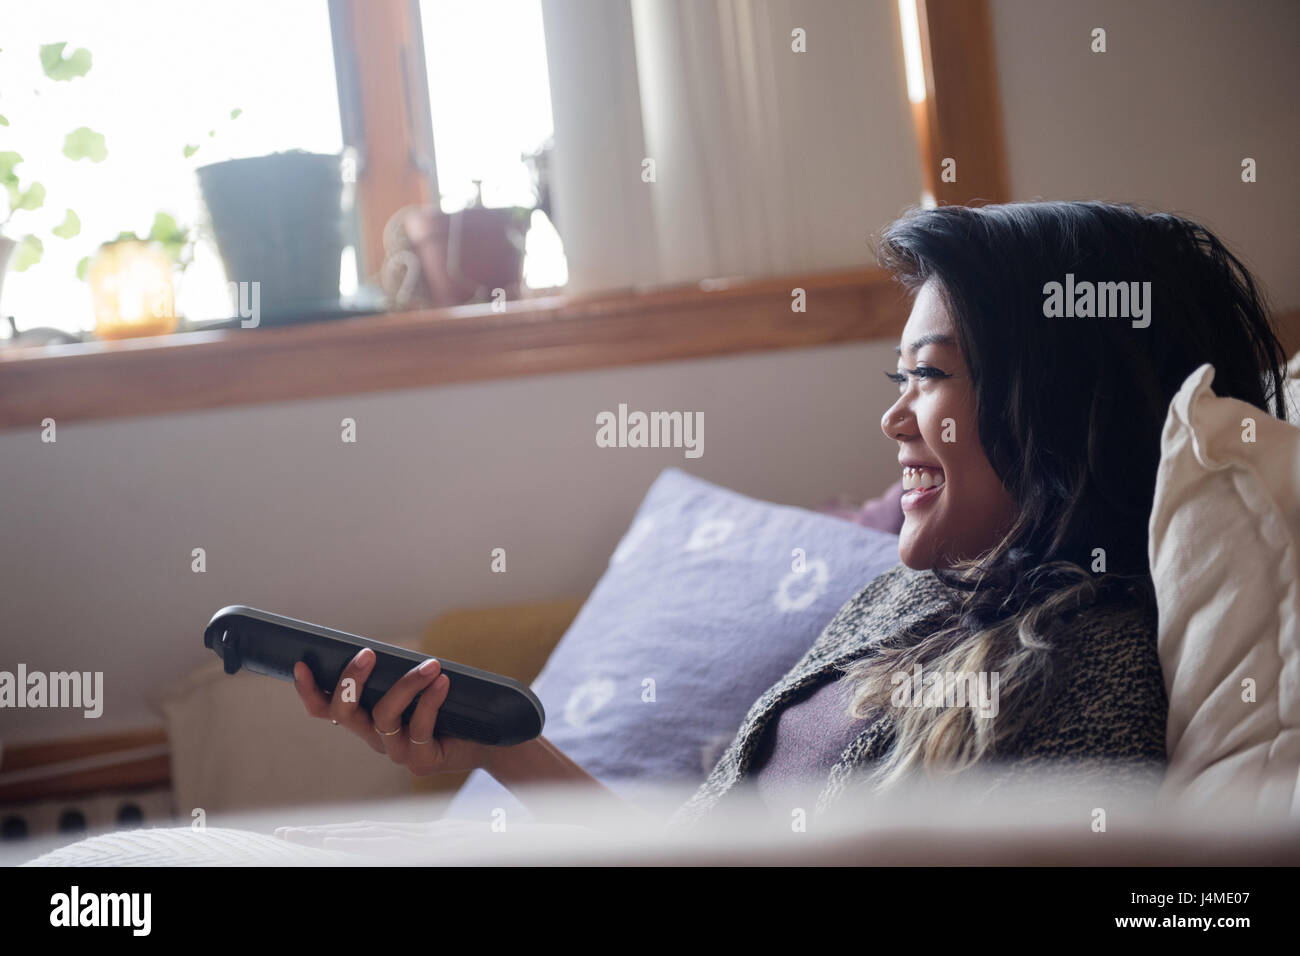 Smiling Mixed Race woman holding remote control and watching television Stock Photo